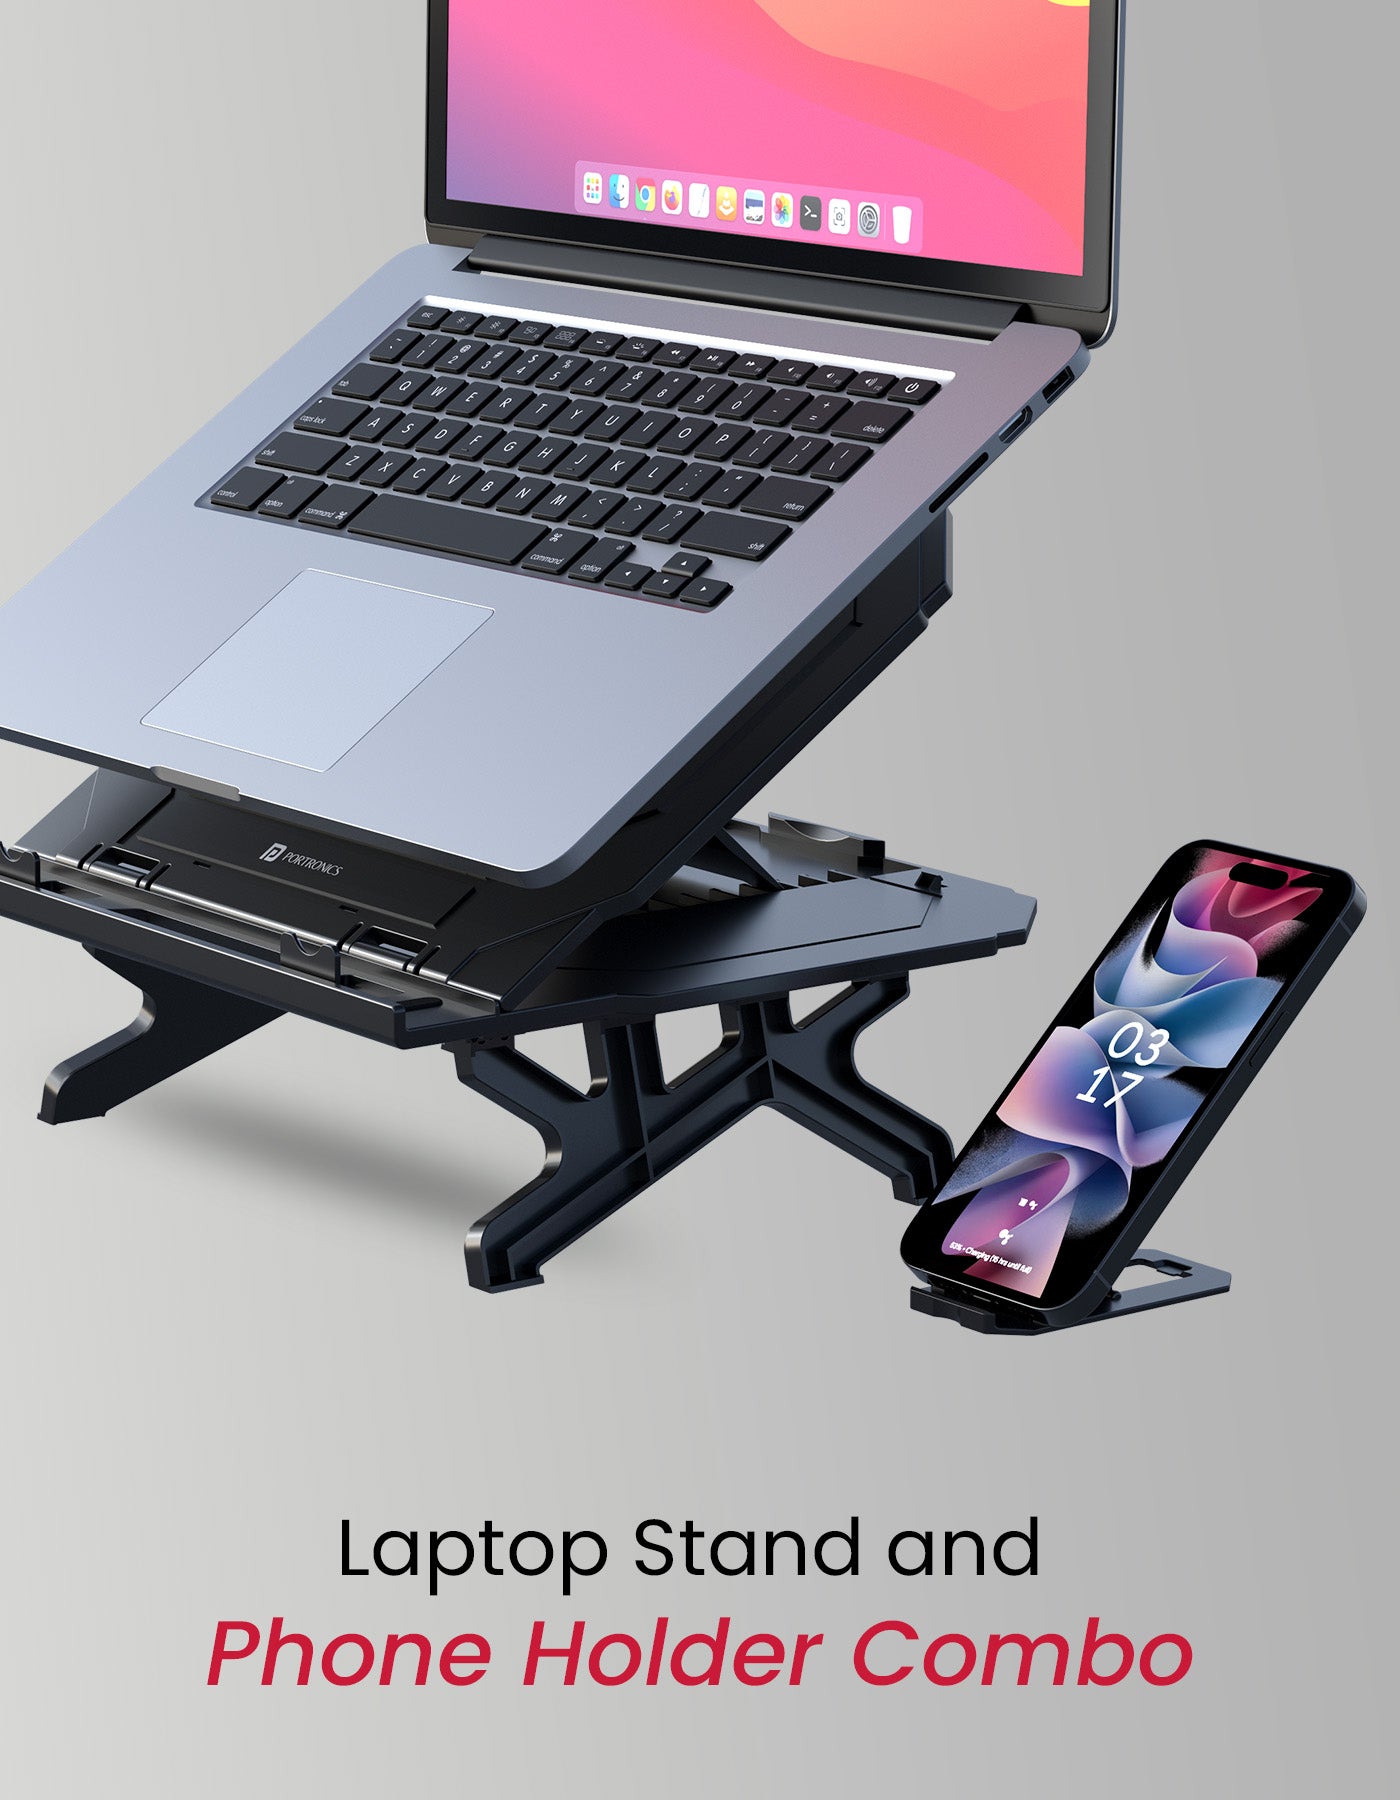 Portronics My Buddy Hexa 33: Portable & Adjustable Laptop/tablet Stand with air vantilation cools laptop